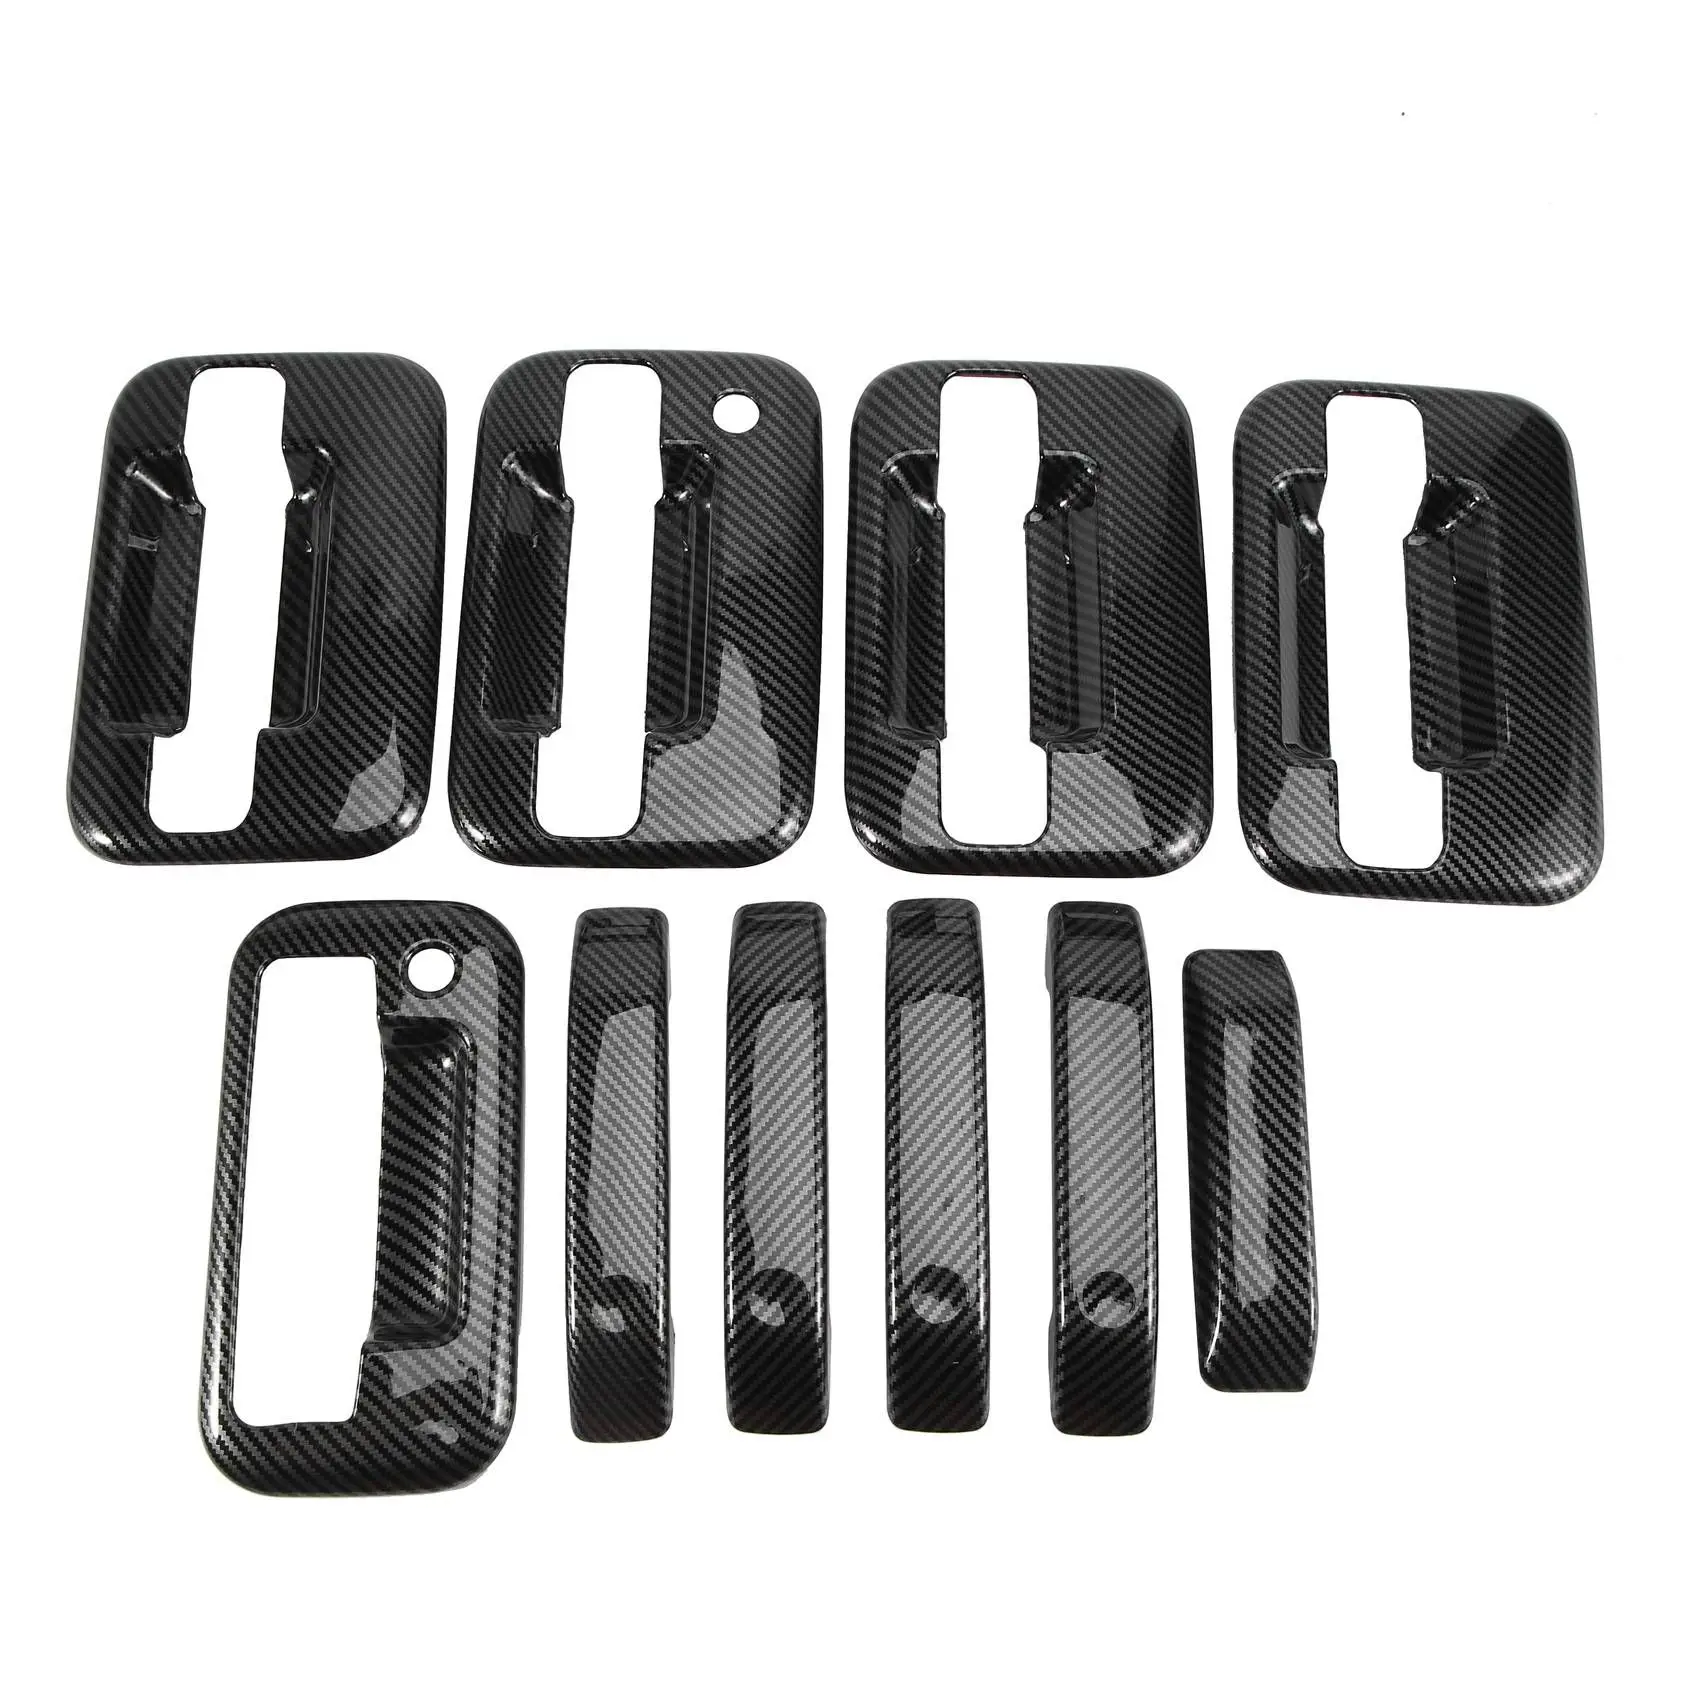 

External Door Handle Covers Without Keypad & Tailgate Cover with Keyhole for 2004-2019 Ford F-150 F150 Carbon Fiber